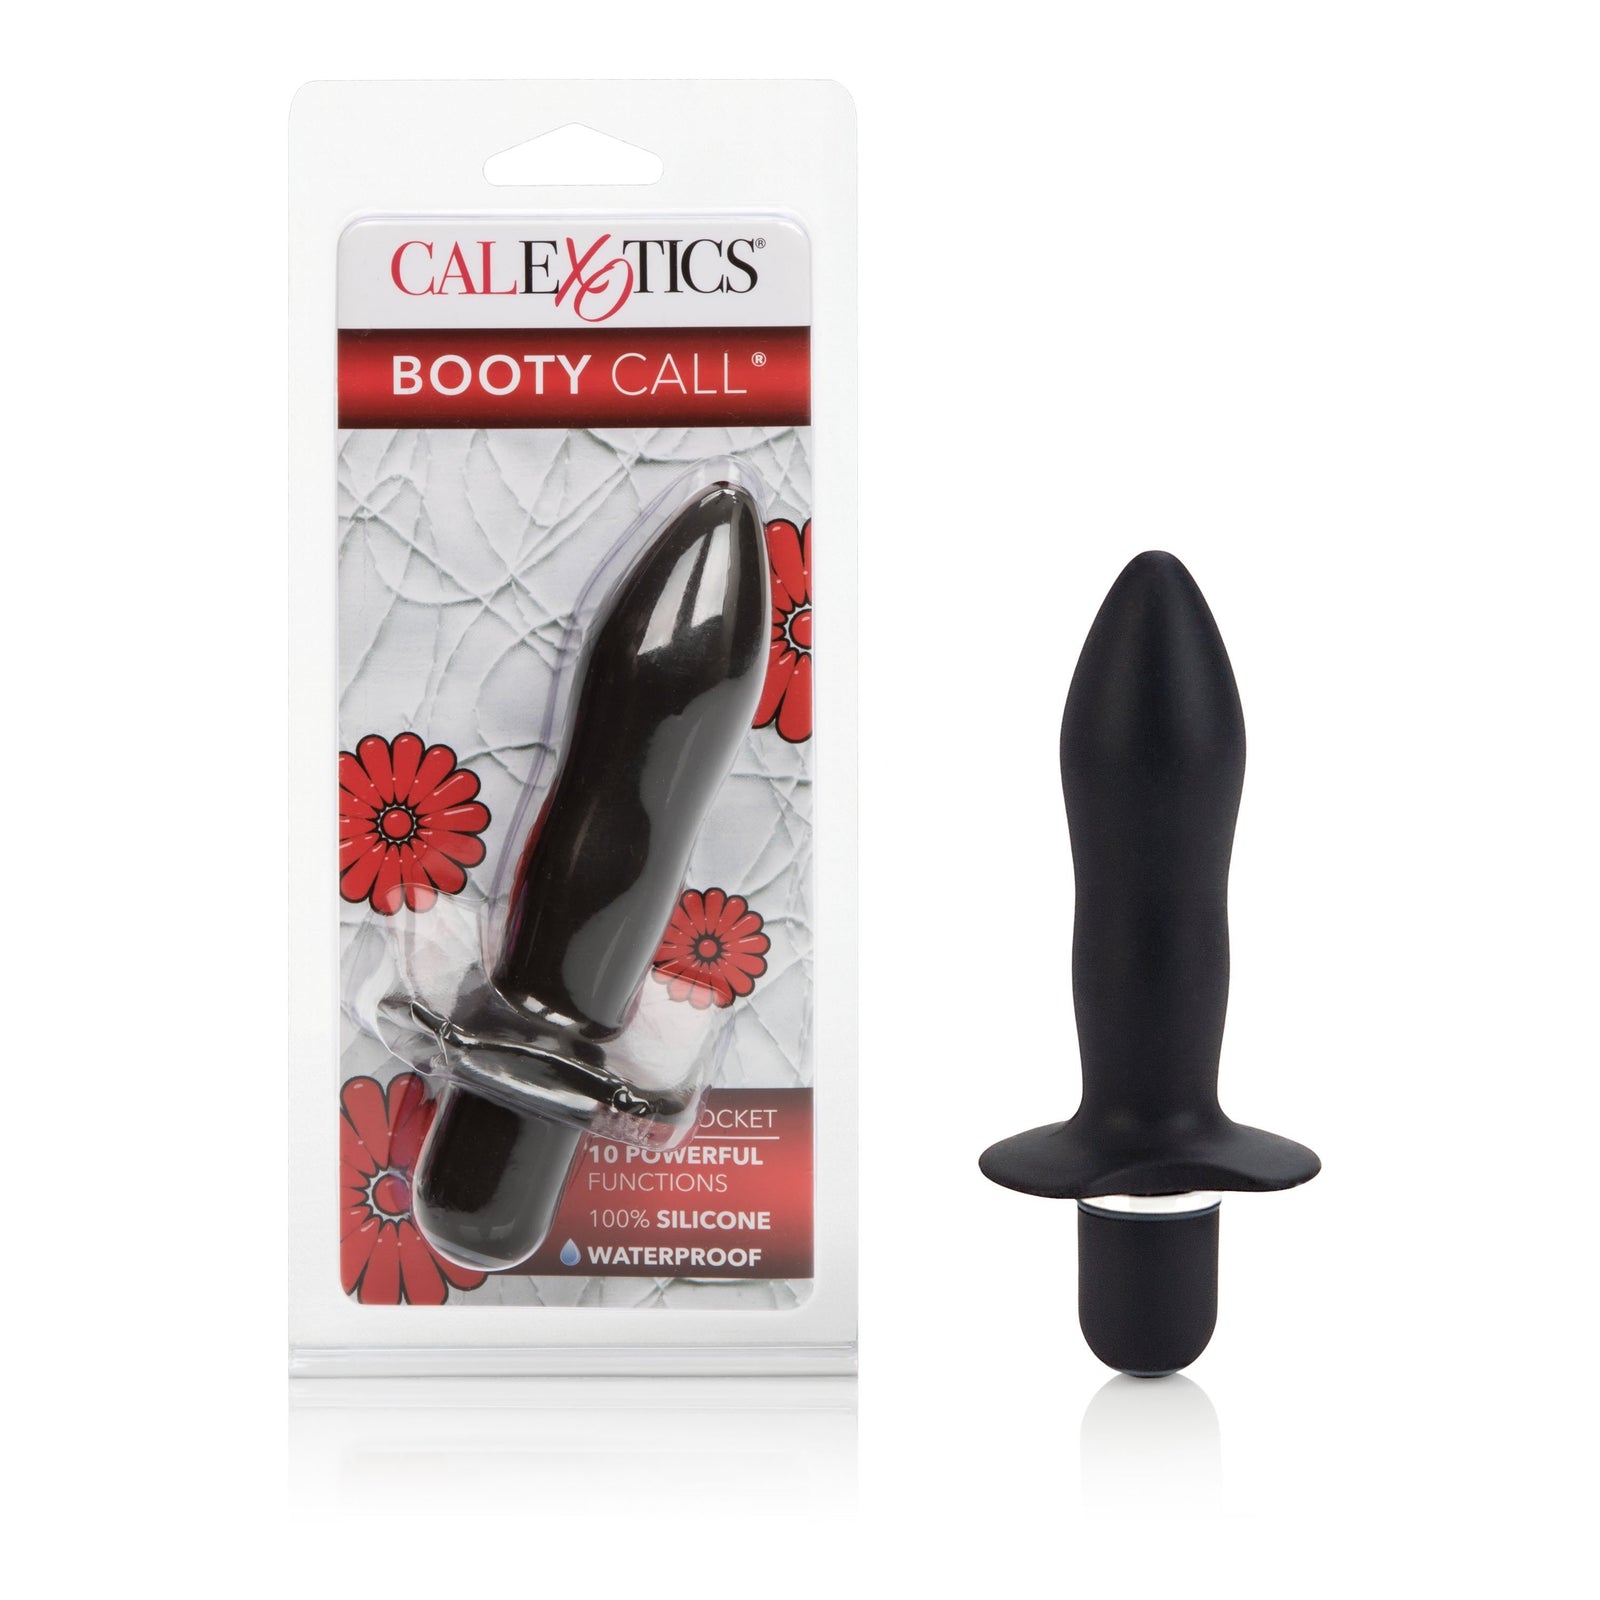 California Exotics - Booty Call Booty Rocket Vibrating Prostate Massager (Black) Prostate Massager (Vibration) Non Rechargeable Durio Asia